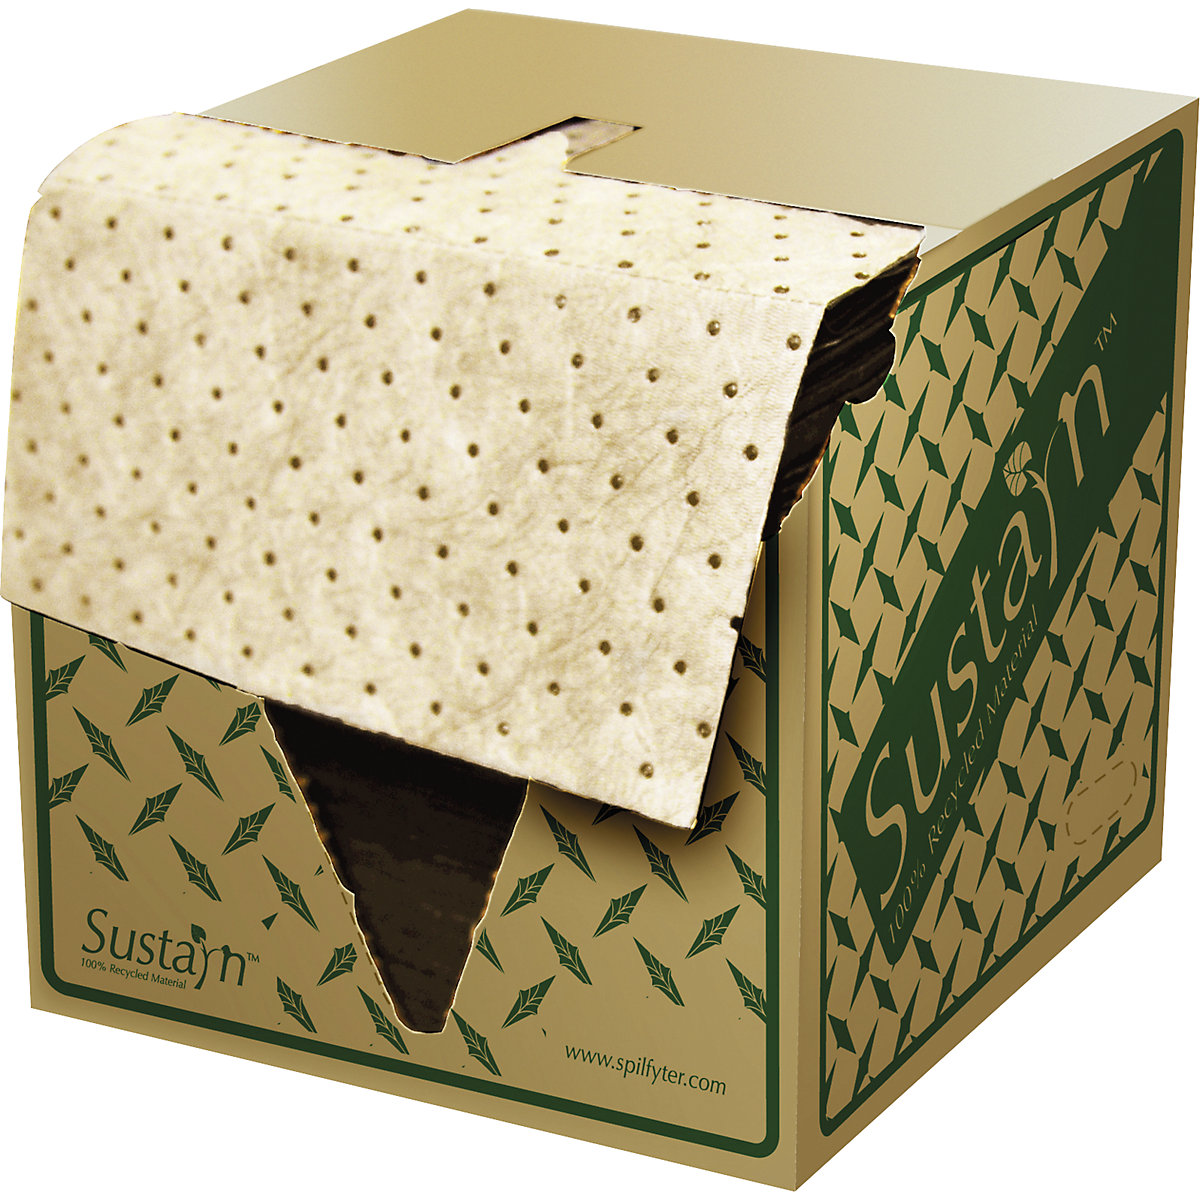 Sustayn™ absorbent sheeting for oil